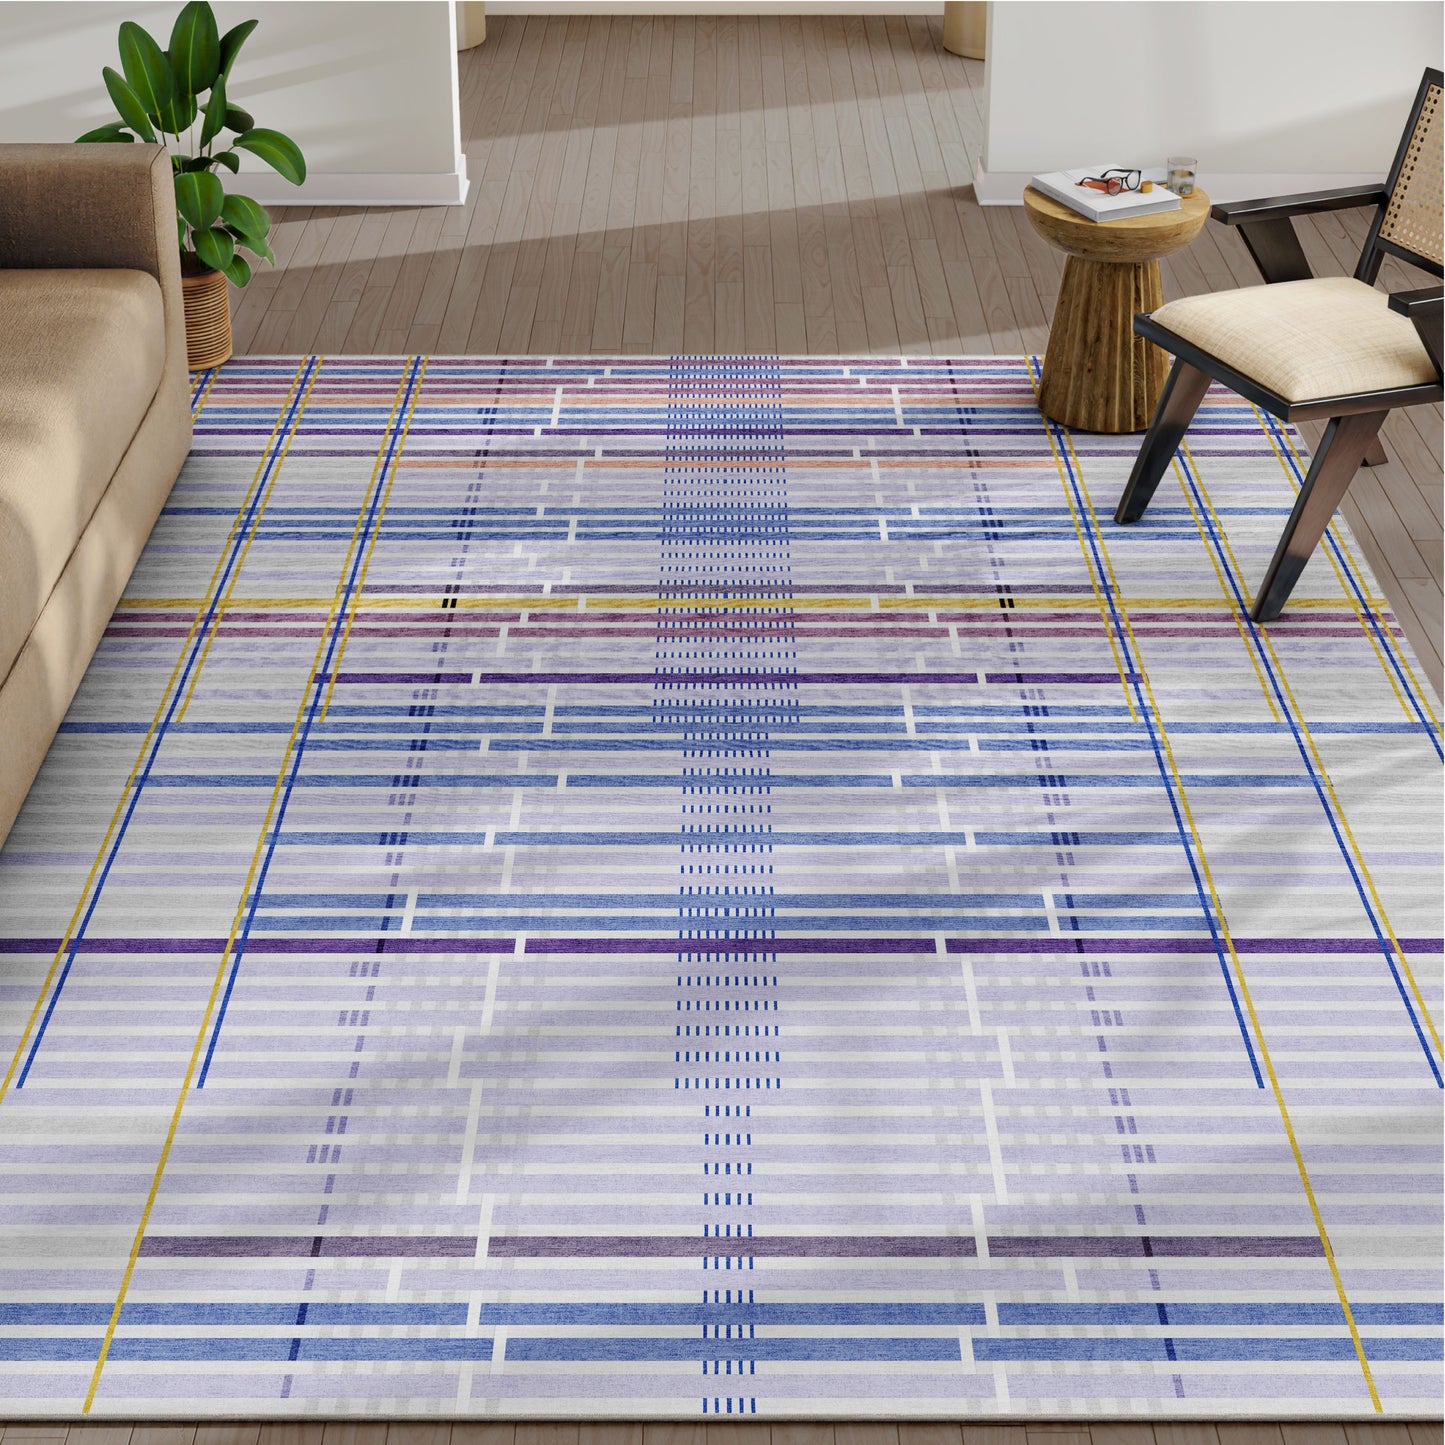 Unraveling Stories by Giorgia Lupi  Lavender Rug W-AP-60B